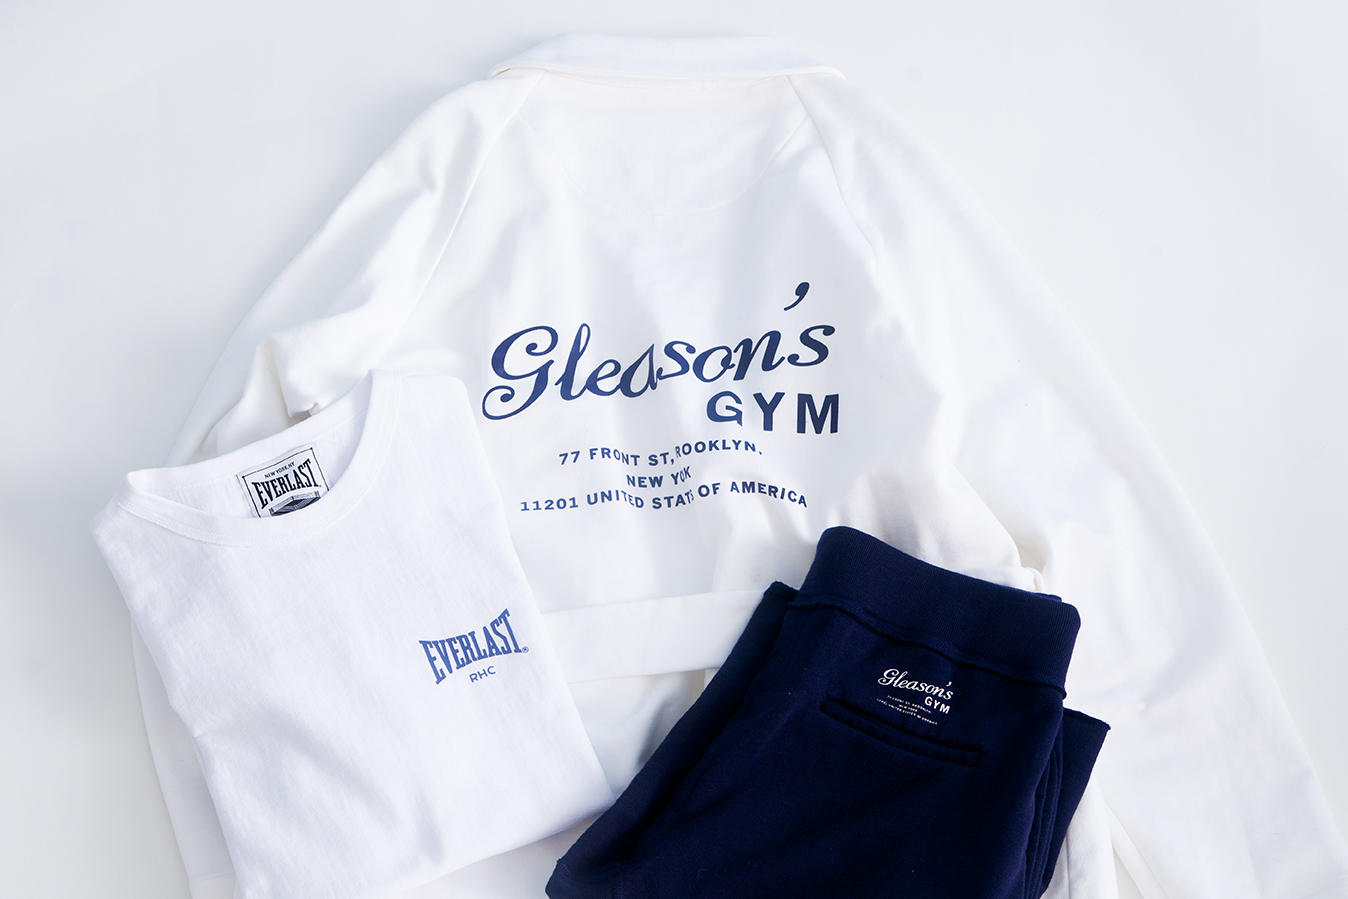 EVERLAST for RHC
gleason's GYM Collection